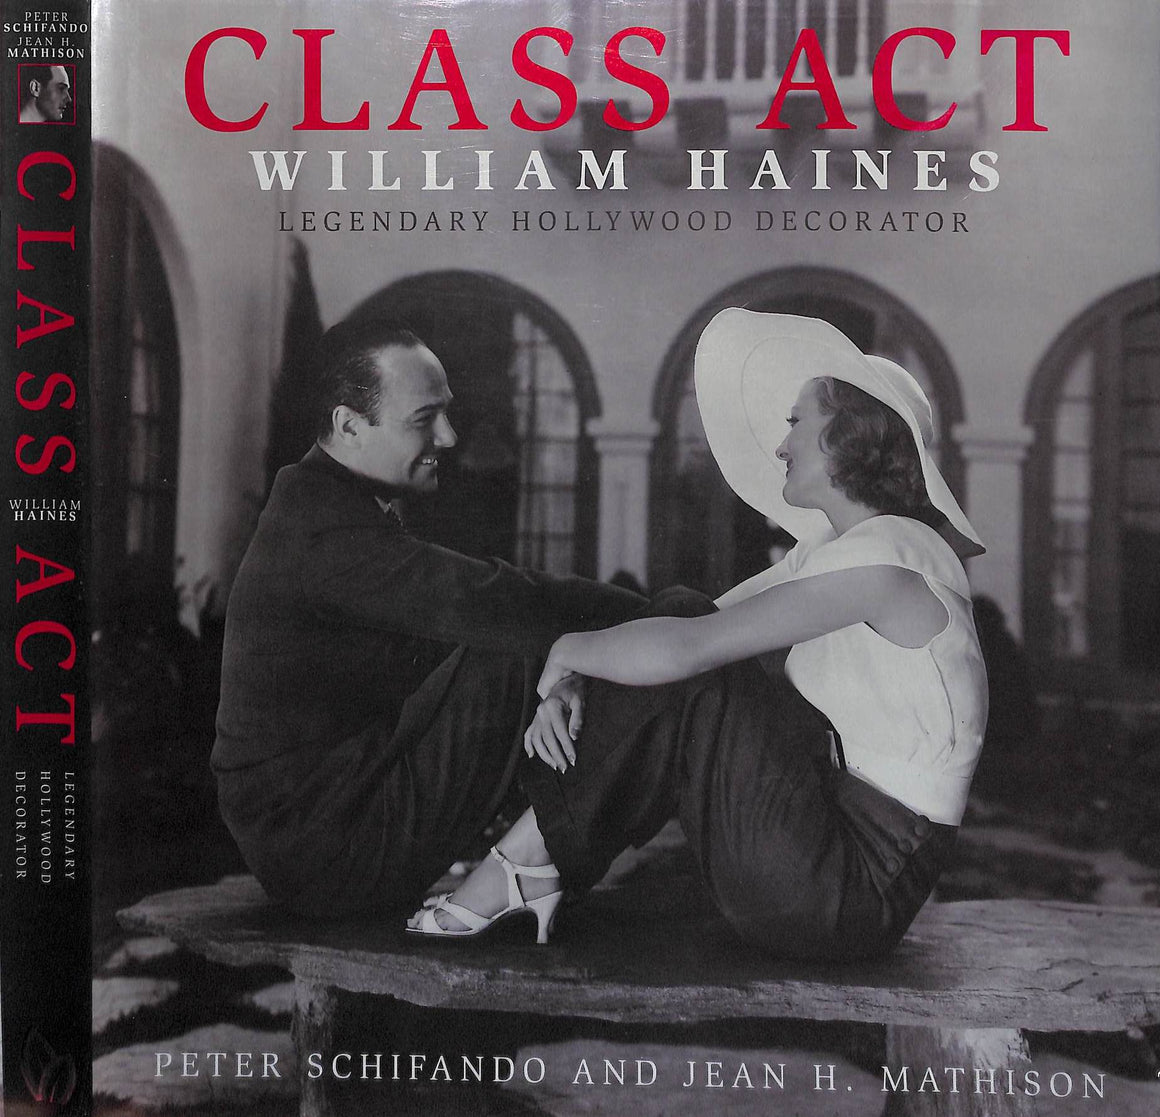 "Class Act: William Haines: Legendary Hollywood Decorator" 2005 SCHIFANDO, Peter and MATHISON, Jean H.